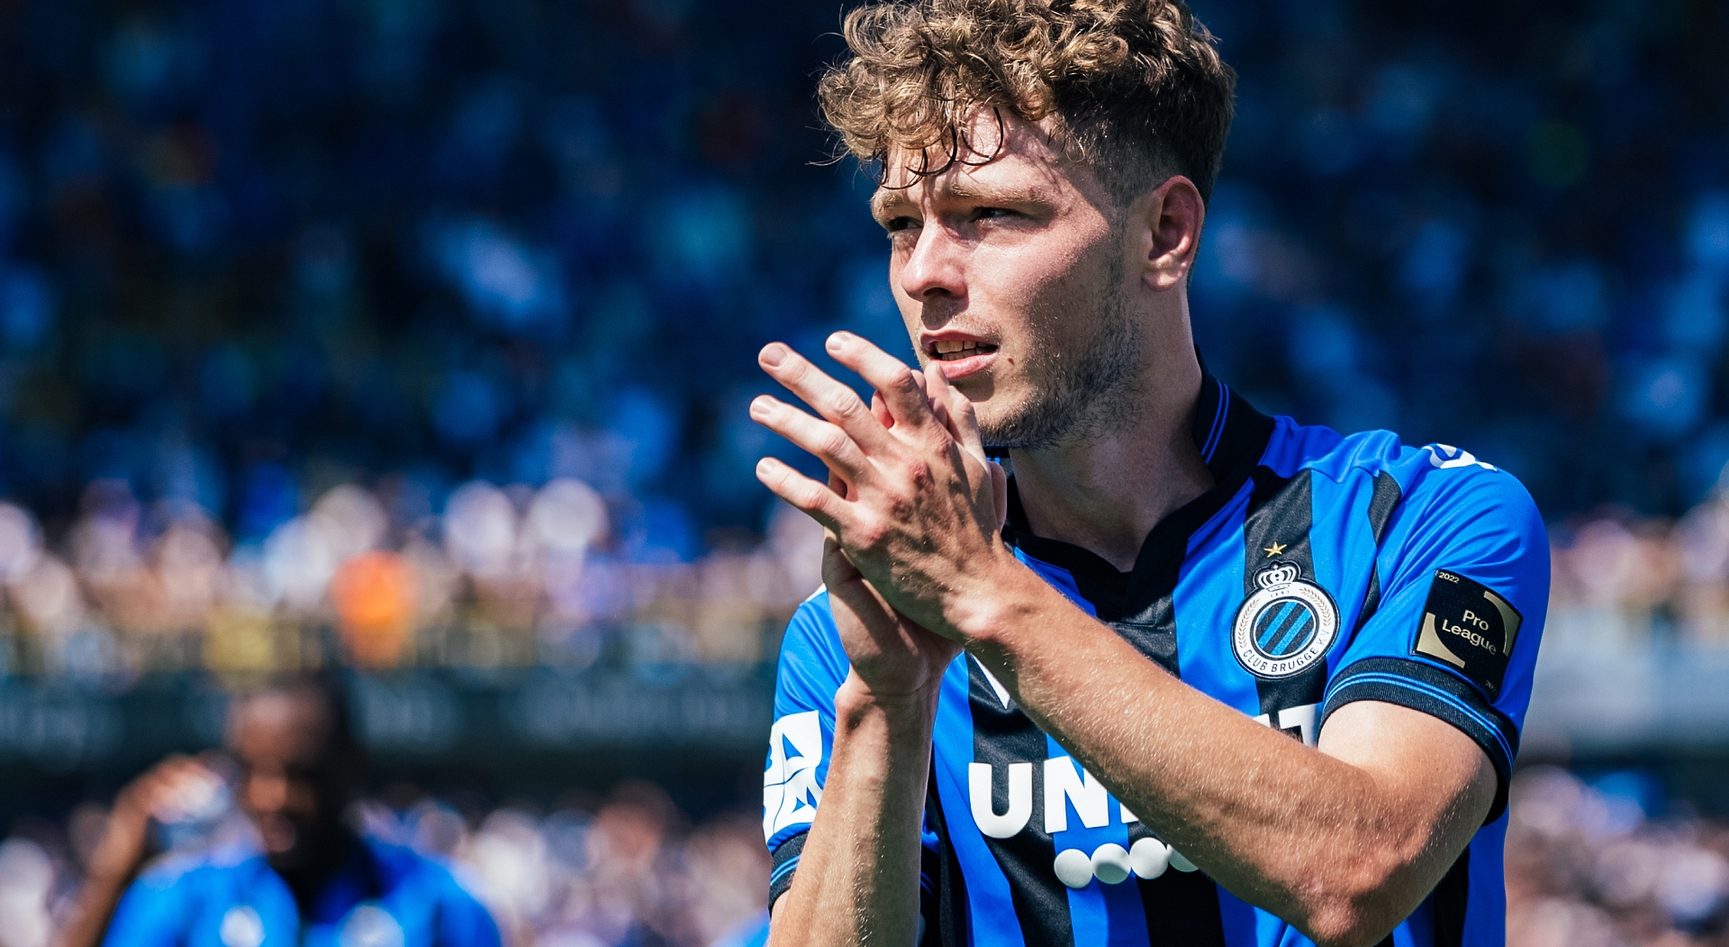 From conversion boost to information clarity: redefining Club Brugge's digital presence